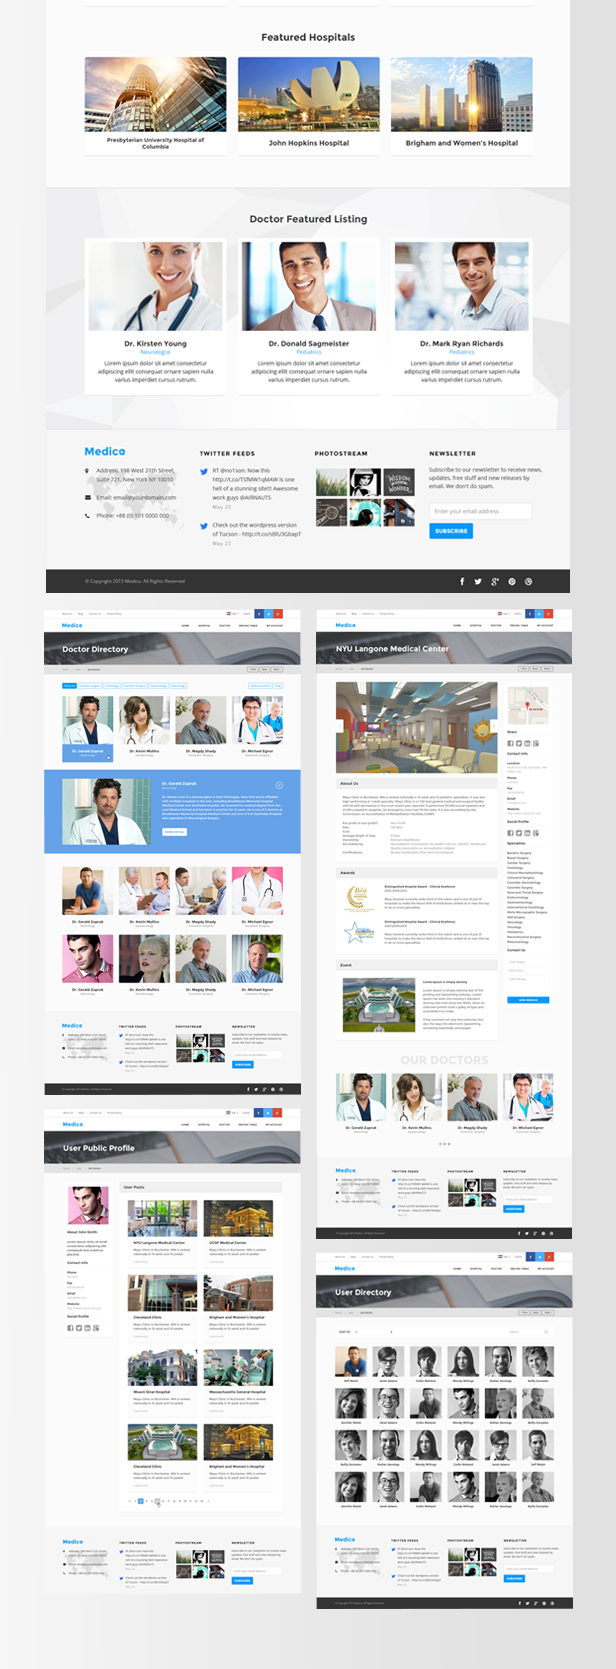 Medical Directory - Hospitals & Doctors Listing Theme - 3